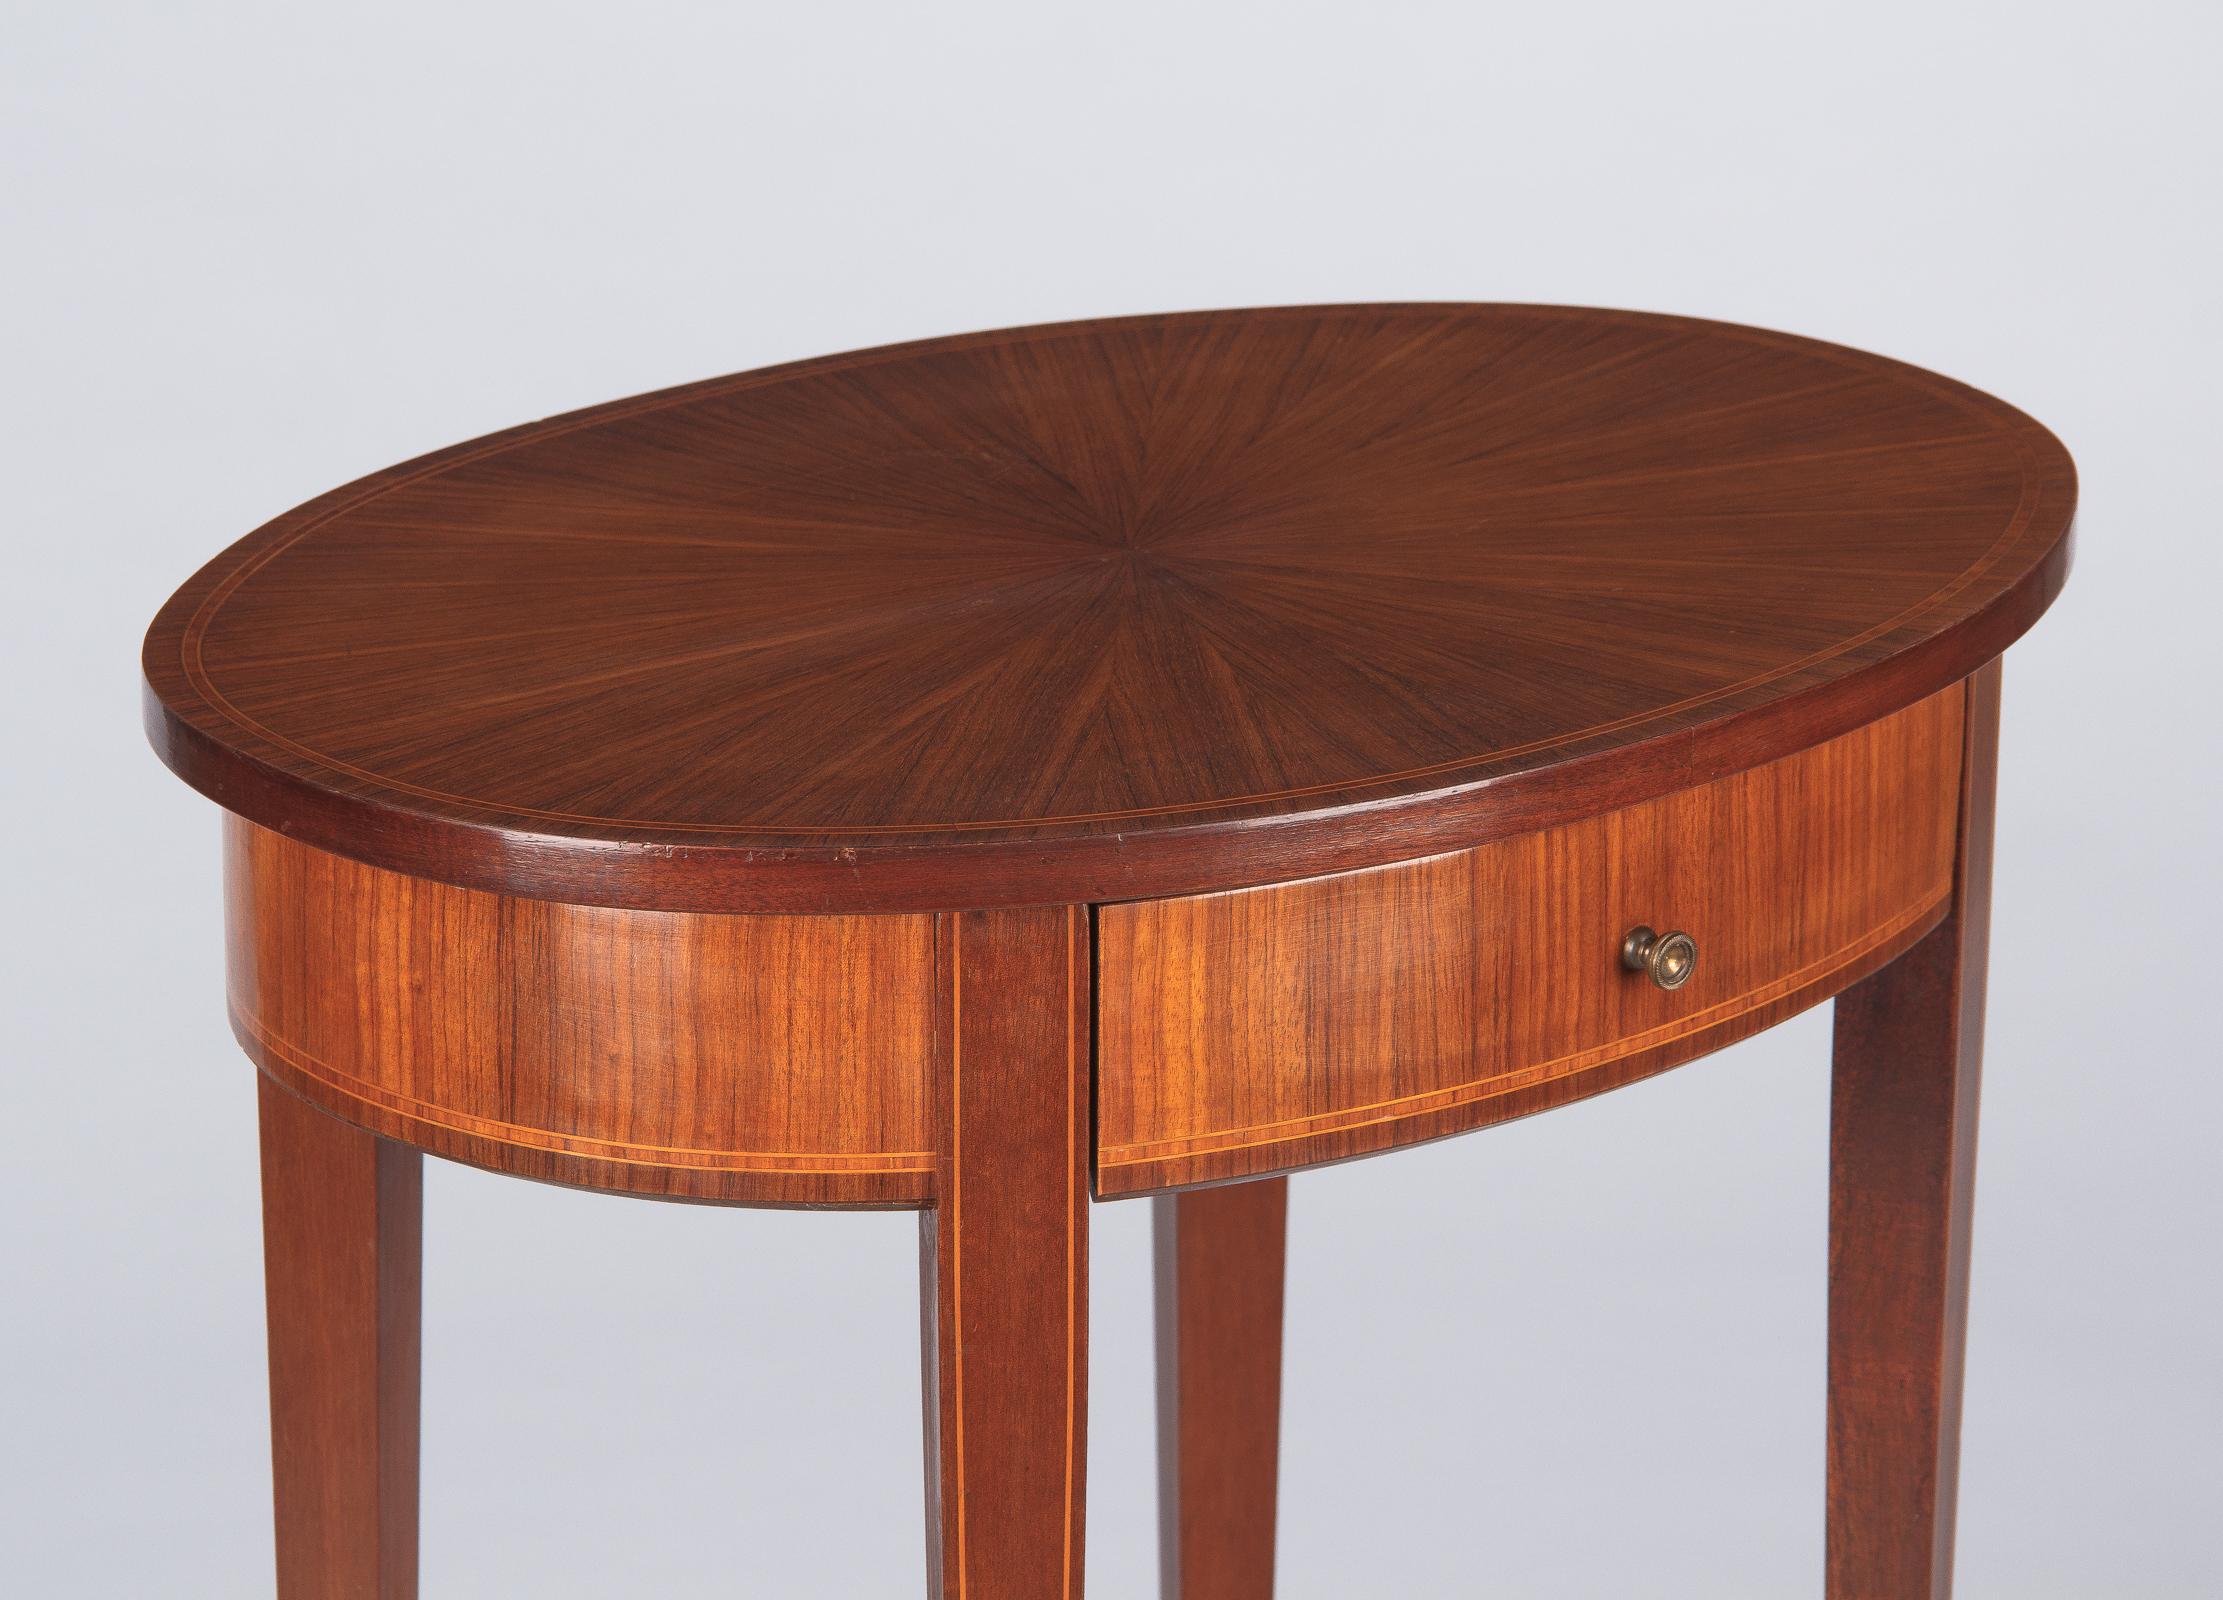 French Louis XVI Style Mahogany Side Table, Early 1900s (Louis XVI.)